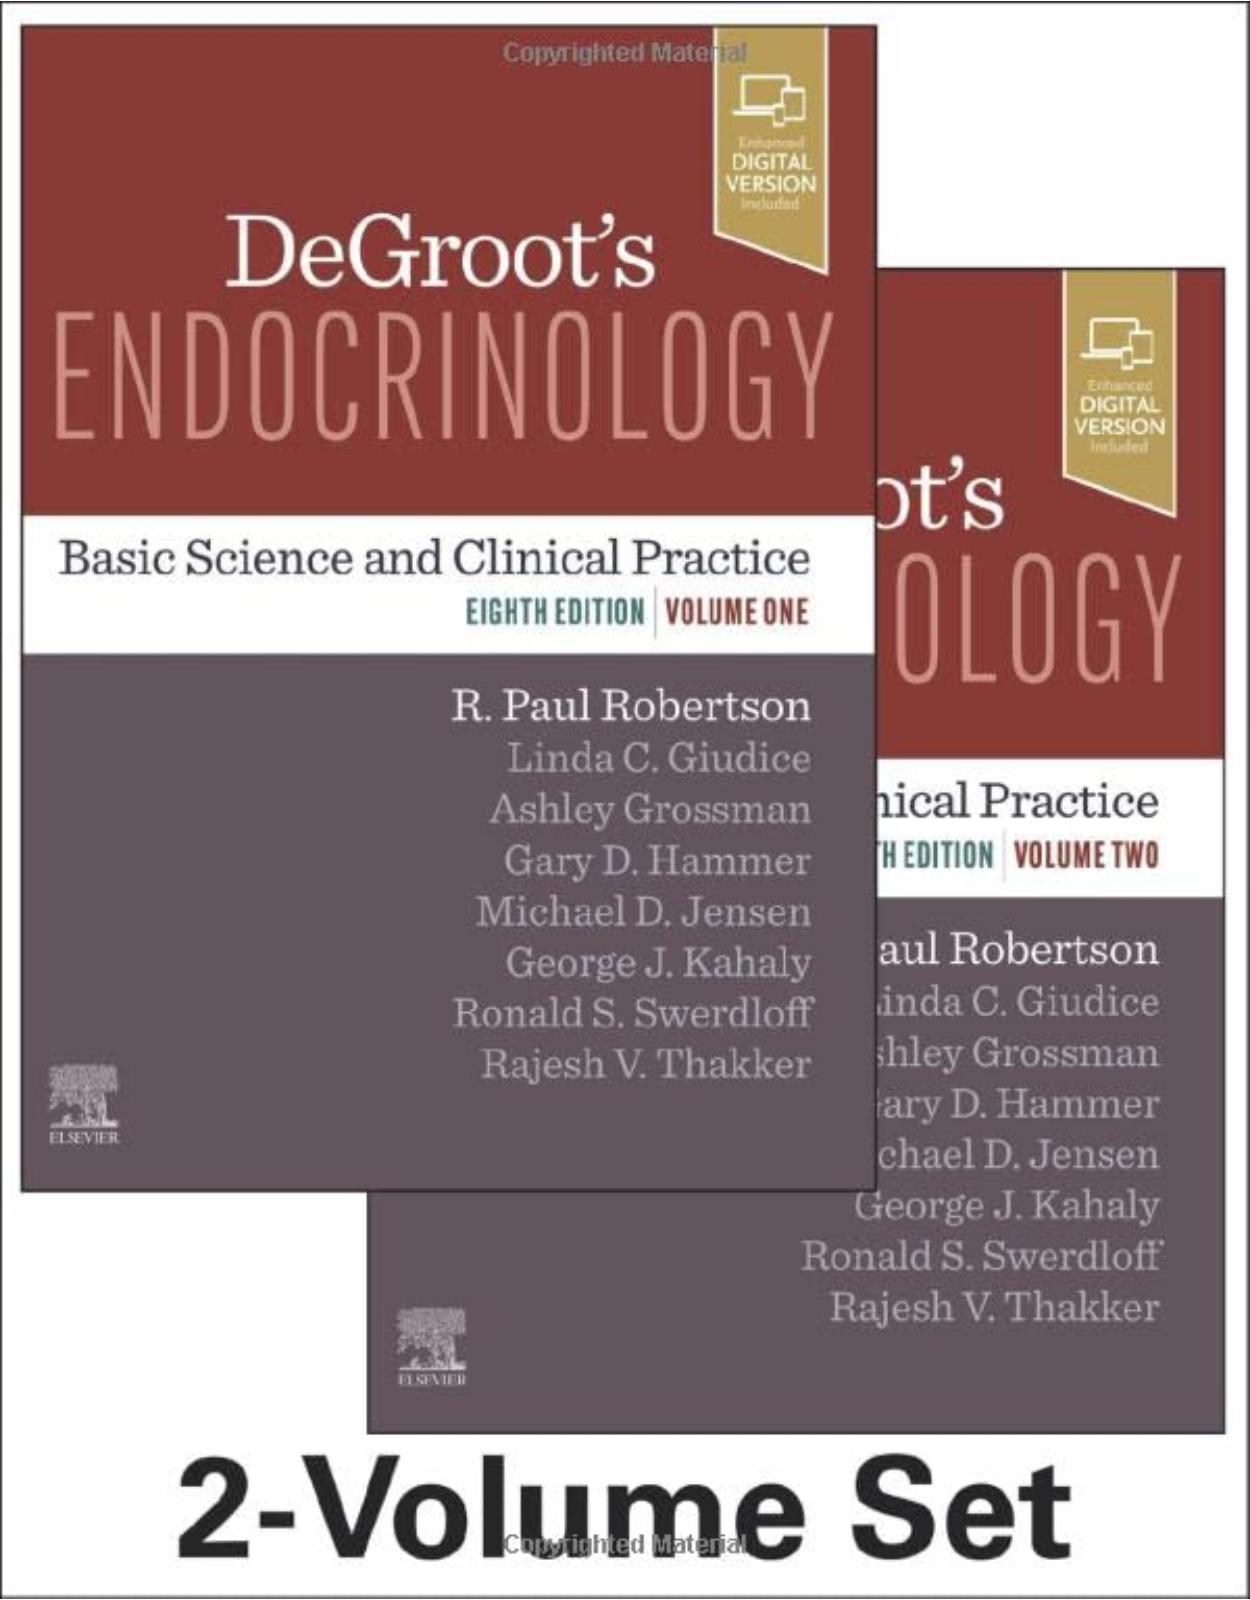 DeGroot’s Endocrinology: Basic Science and Clinical Practice